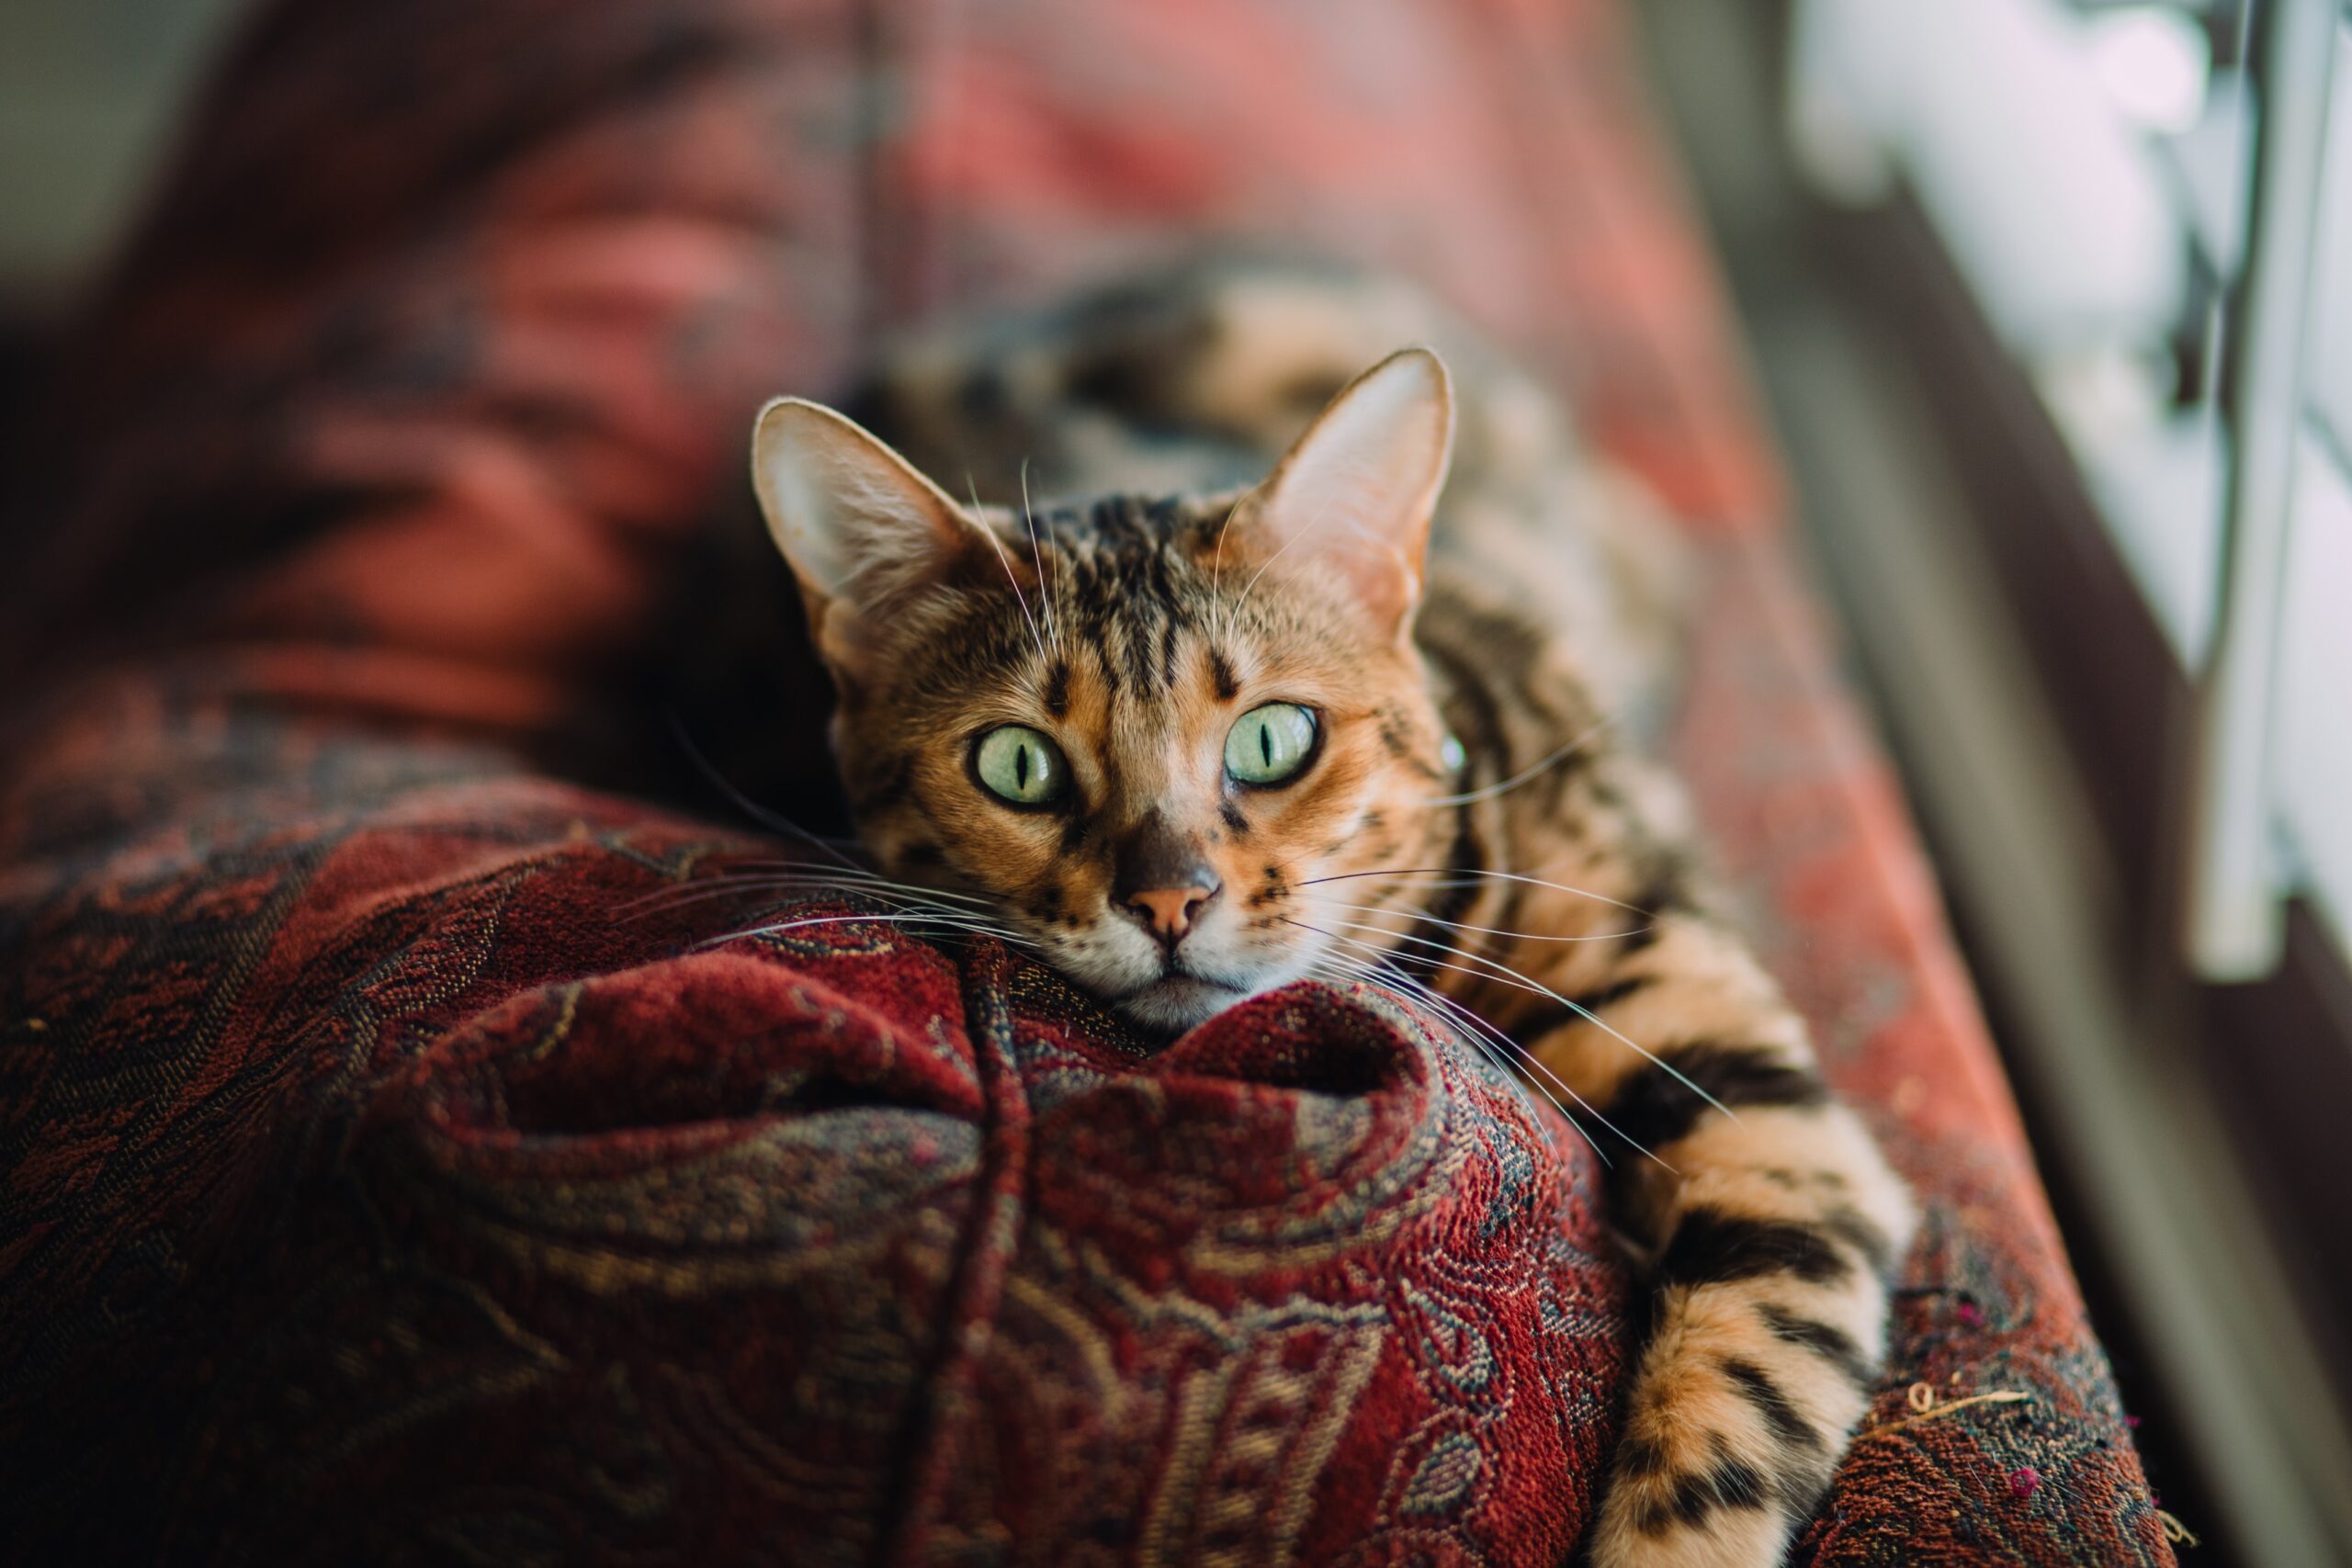 Orange and black cat with green eyes laying on couch